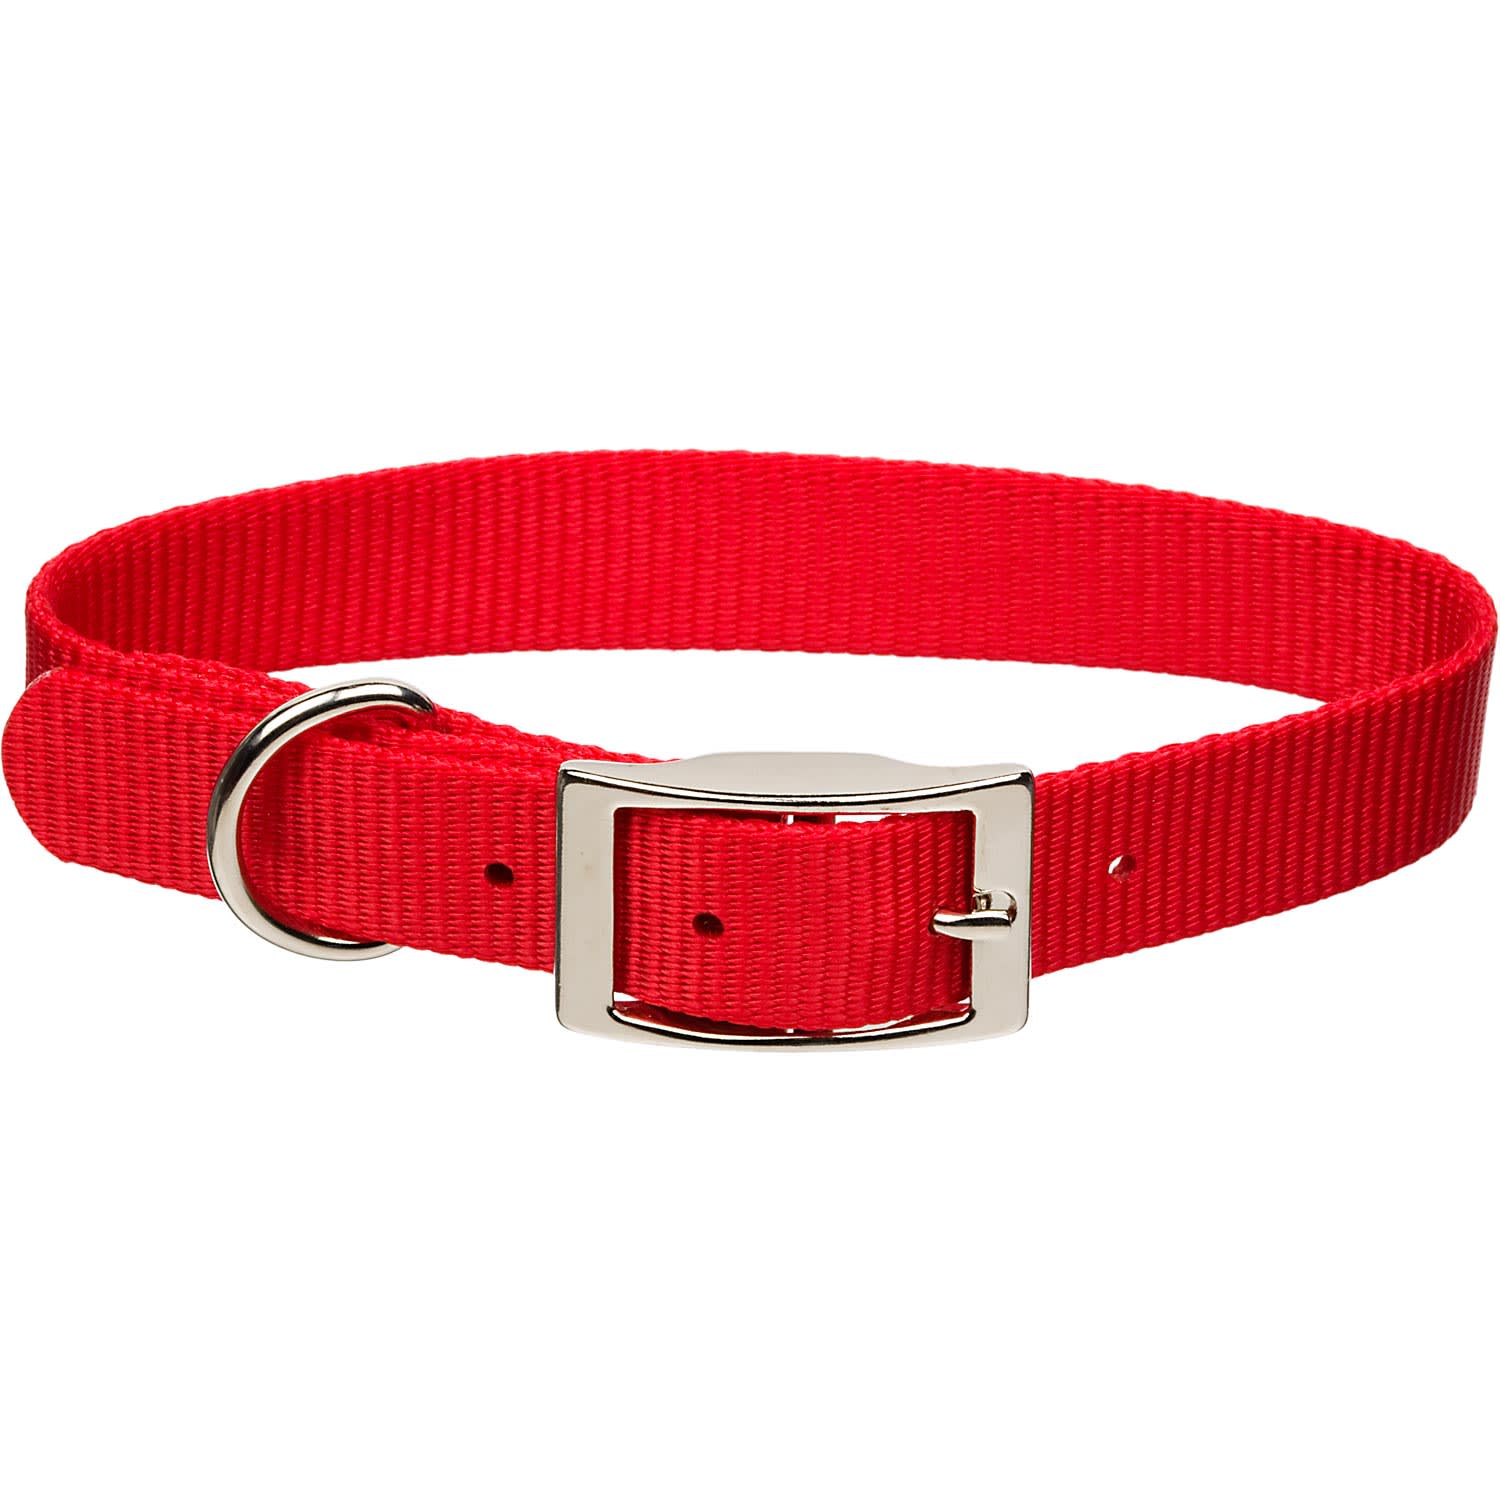 Coastal Pet Products Personalized Red Single-Ply Dog Collar, Small